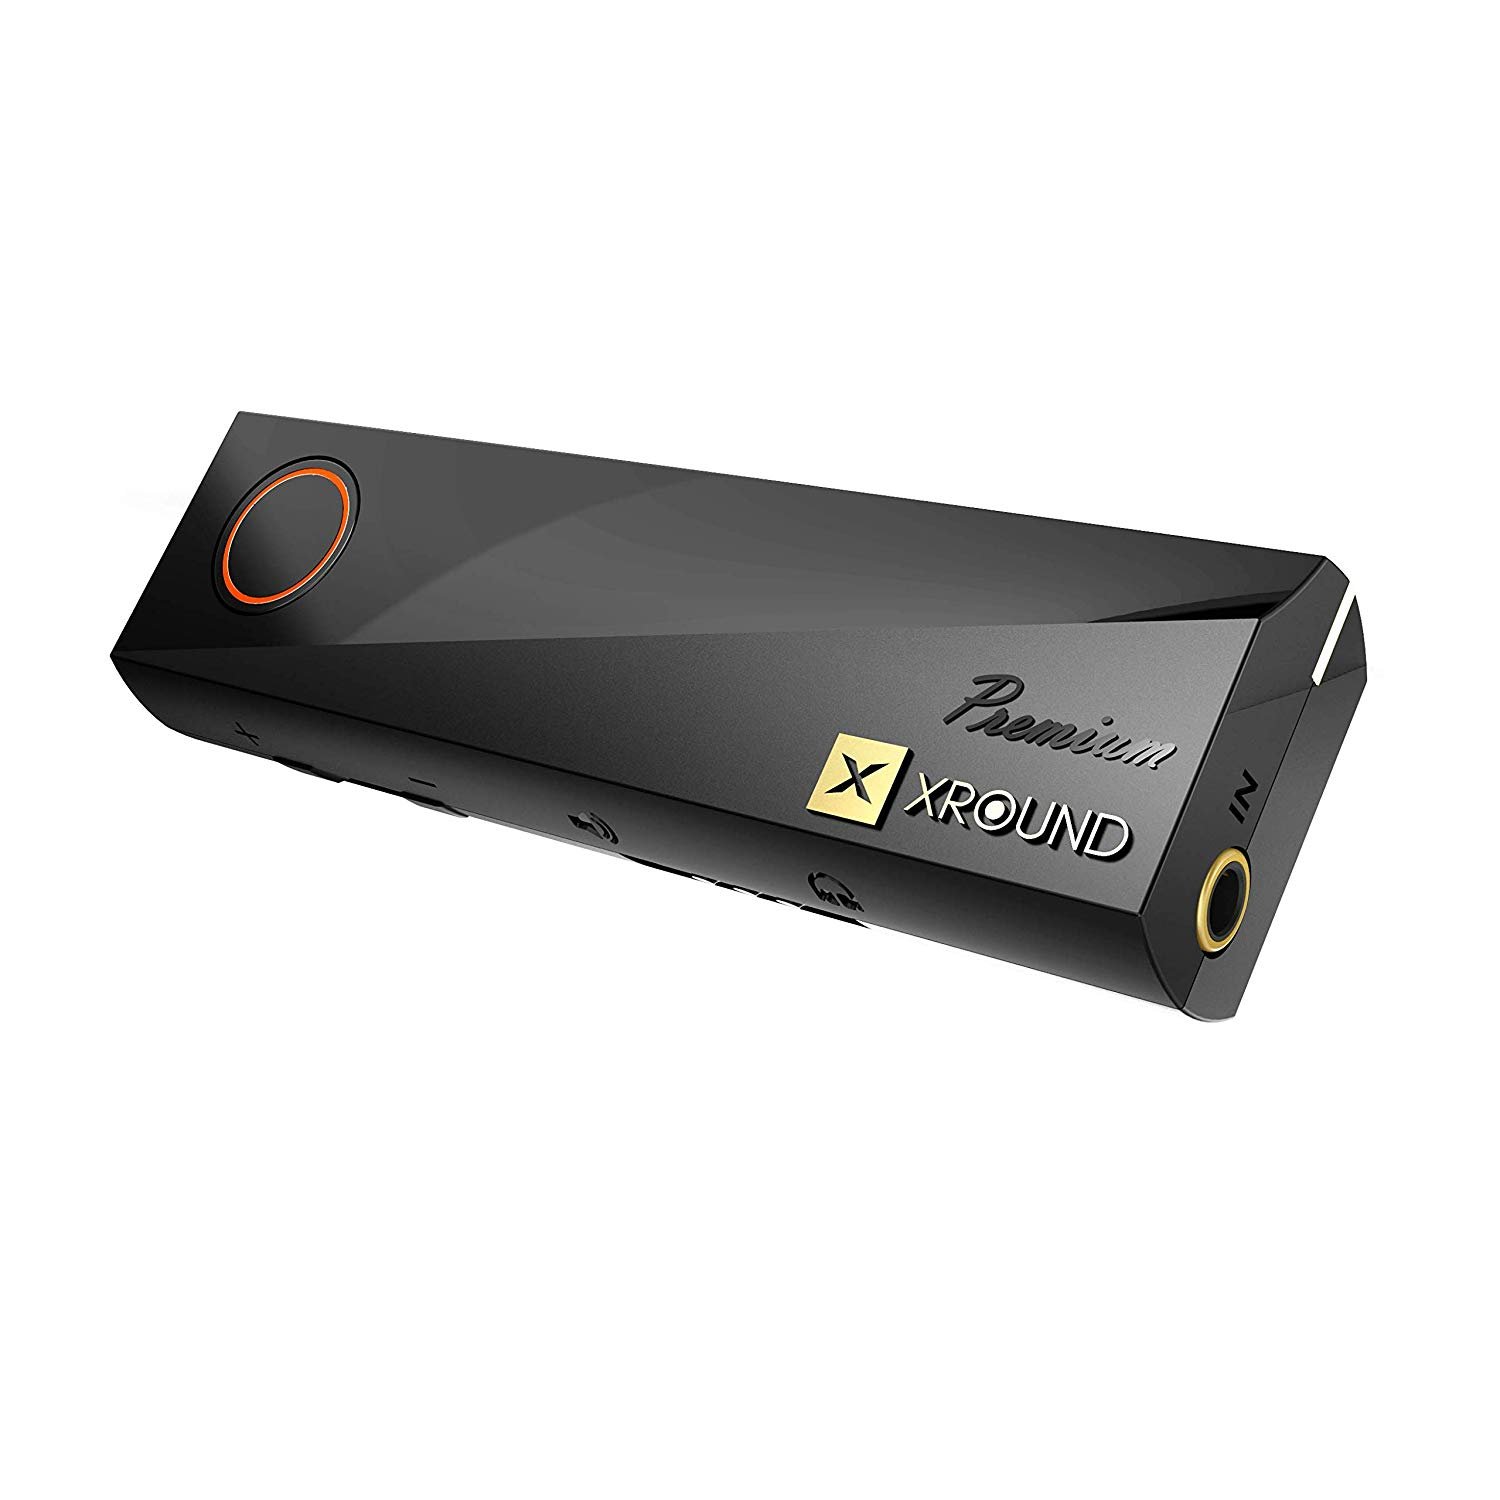 XPUMP Premium - 3D Audio External Sound Card, Portable Surround DAC for Headphone and Speaker. Smart DSP for The Ultimate Gaming, Music and Movies Lis 1